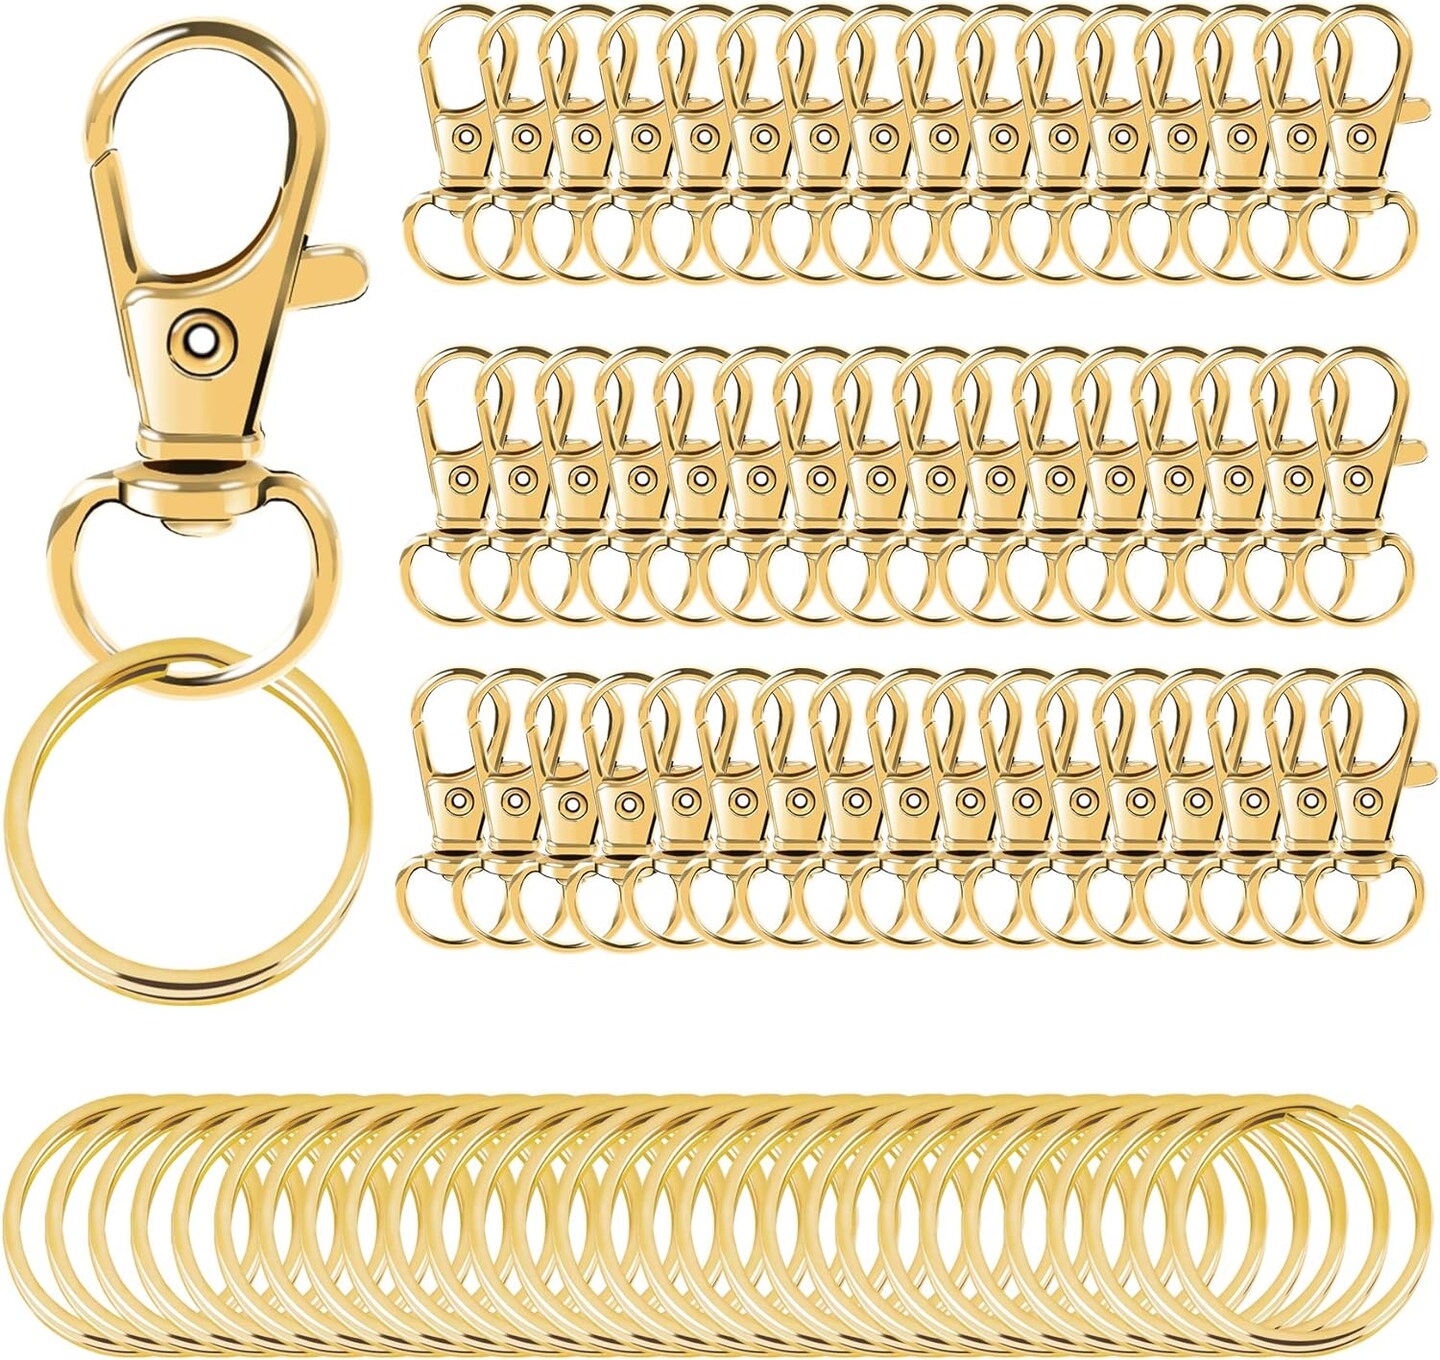 100PCS Gold Swivel Clasps Lanyard Snap Hooks with Key Rings, Key Chain Clip Hooks Lobster Claw Clasps for Keychains Jewelry DIY Crafts